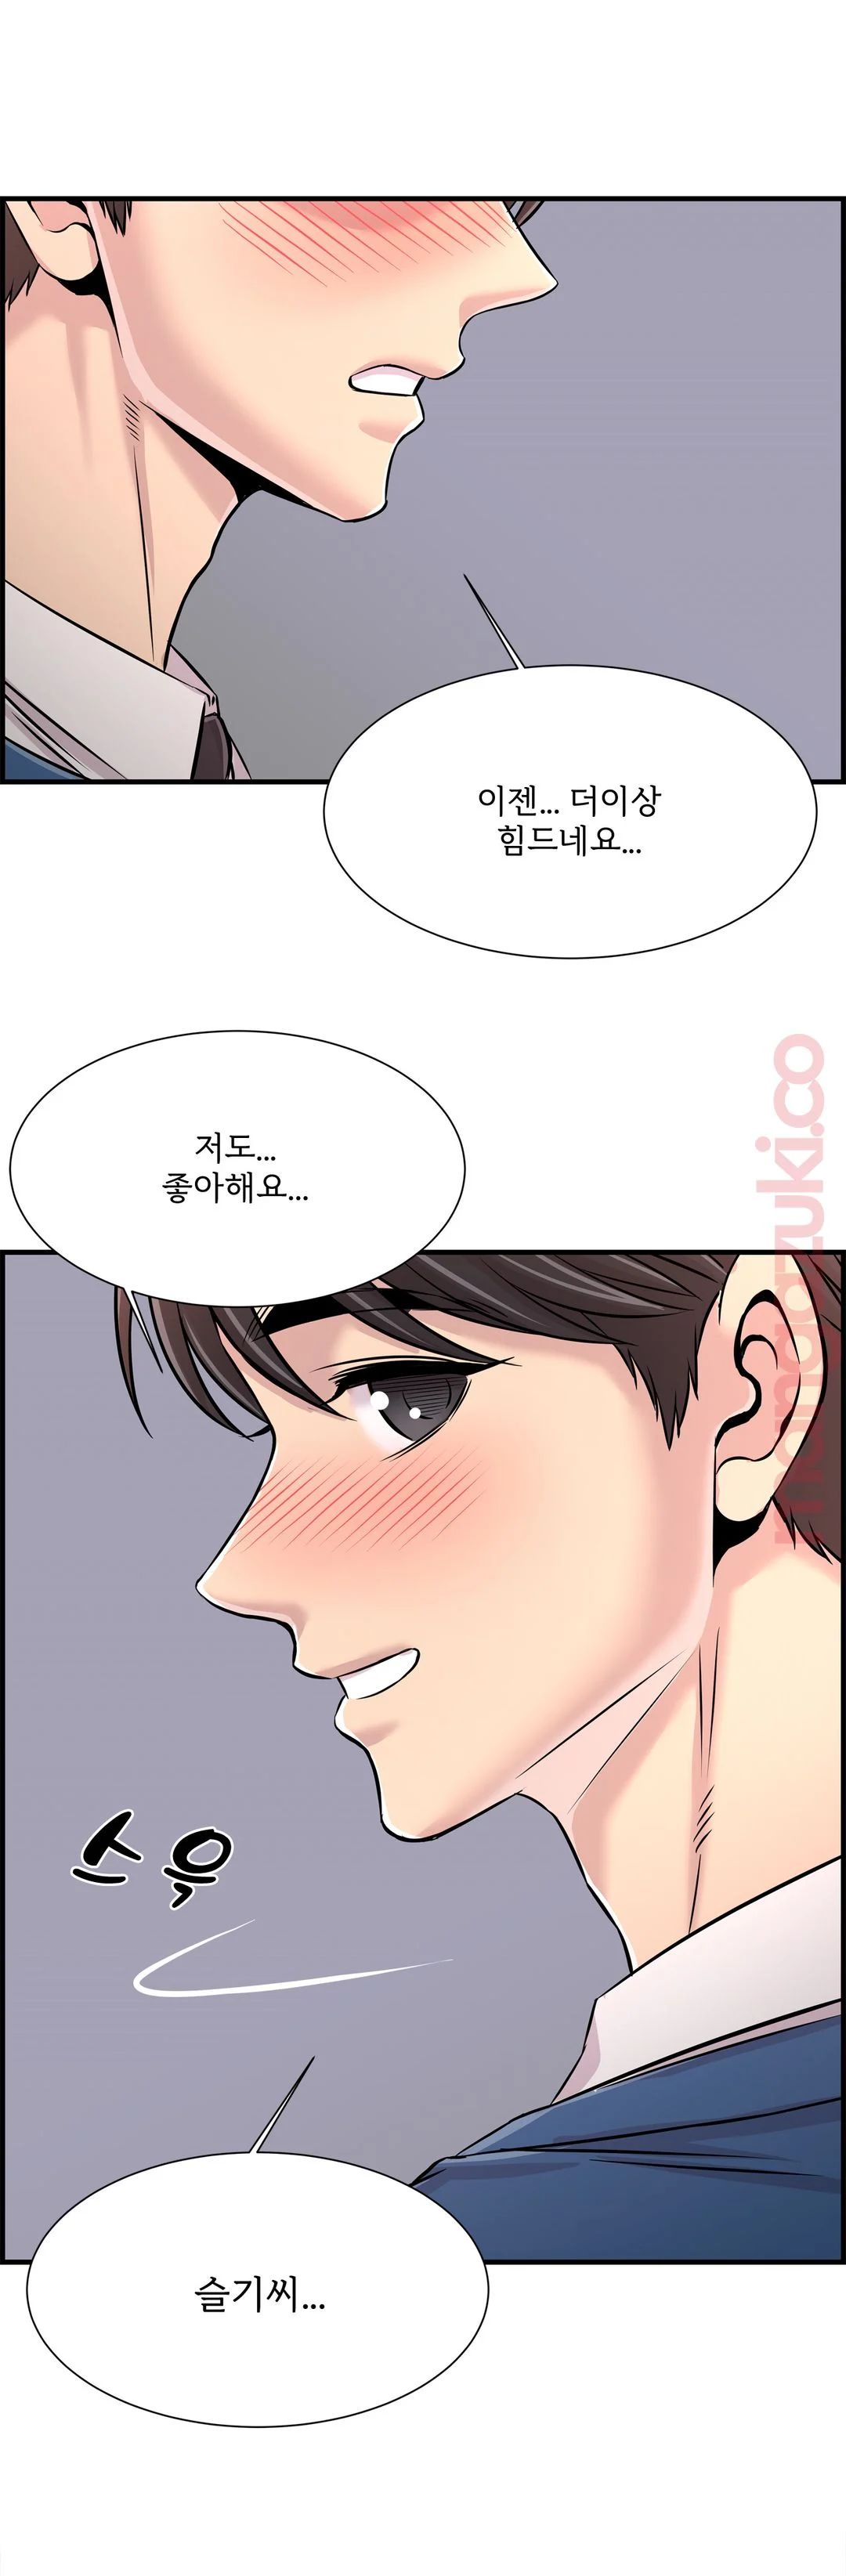 Cram School Scandal Raw - Chapter 28 Page 6